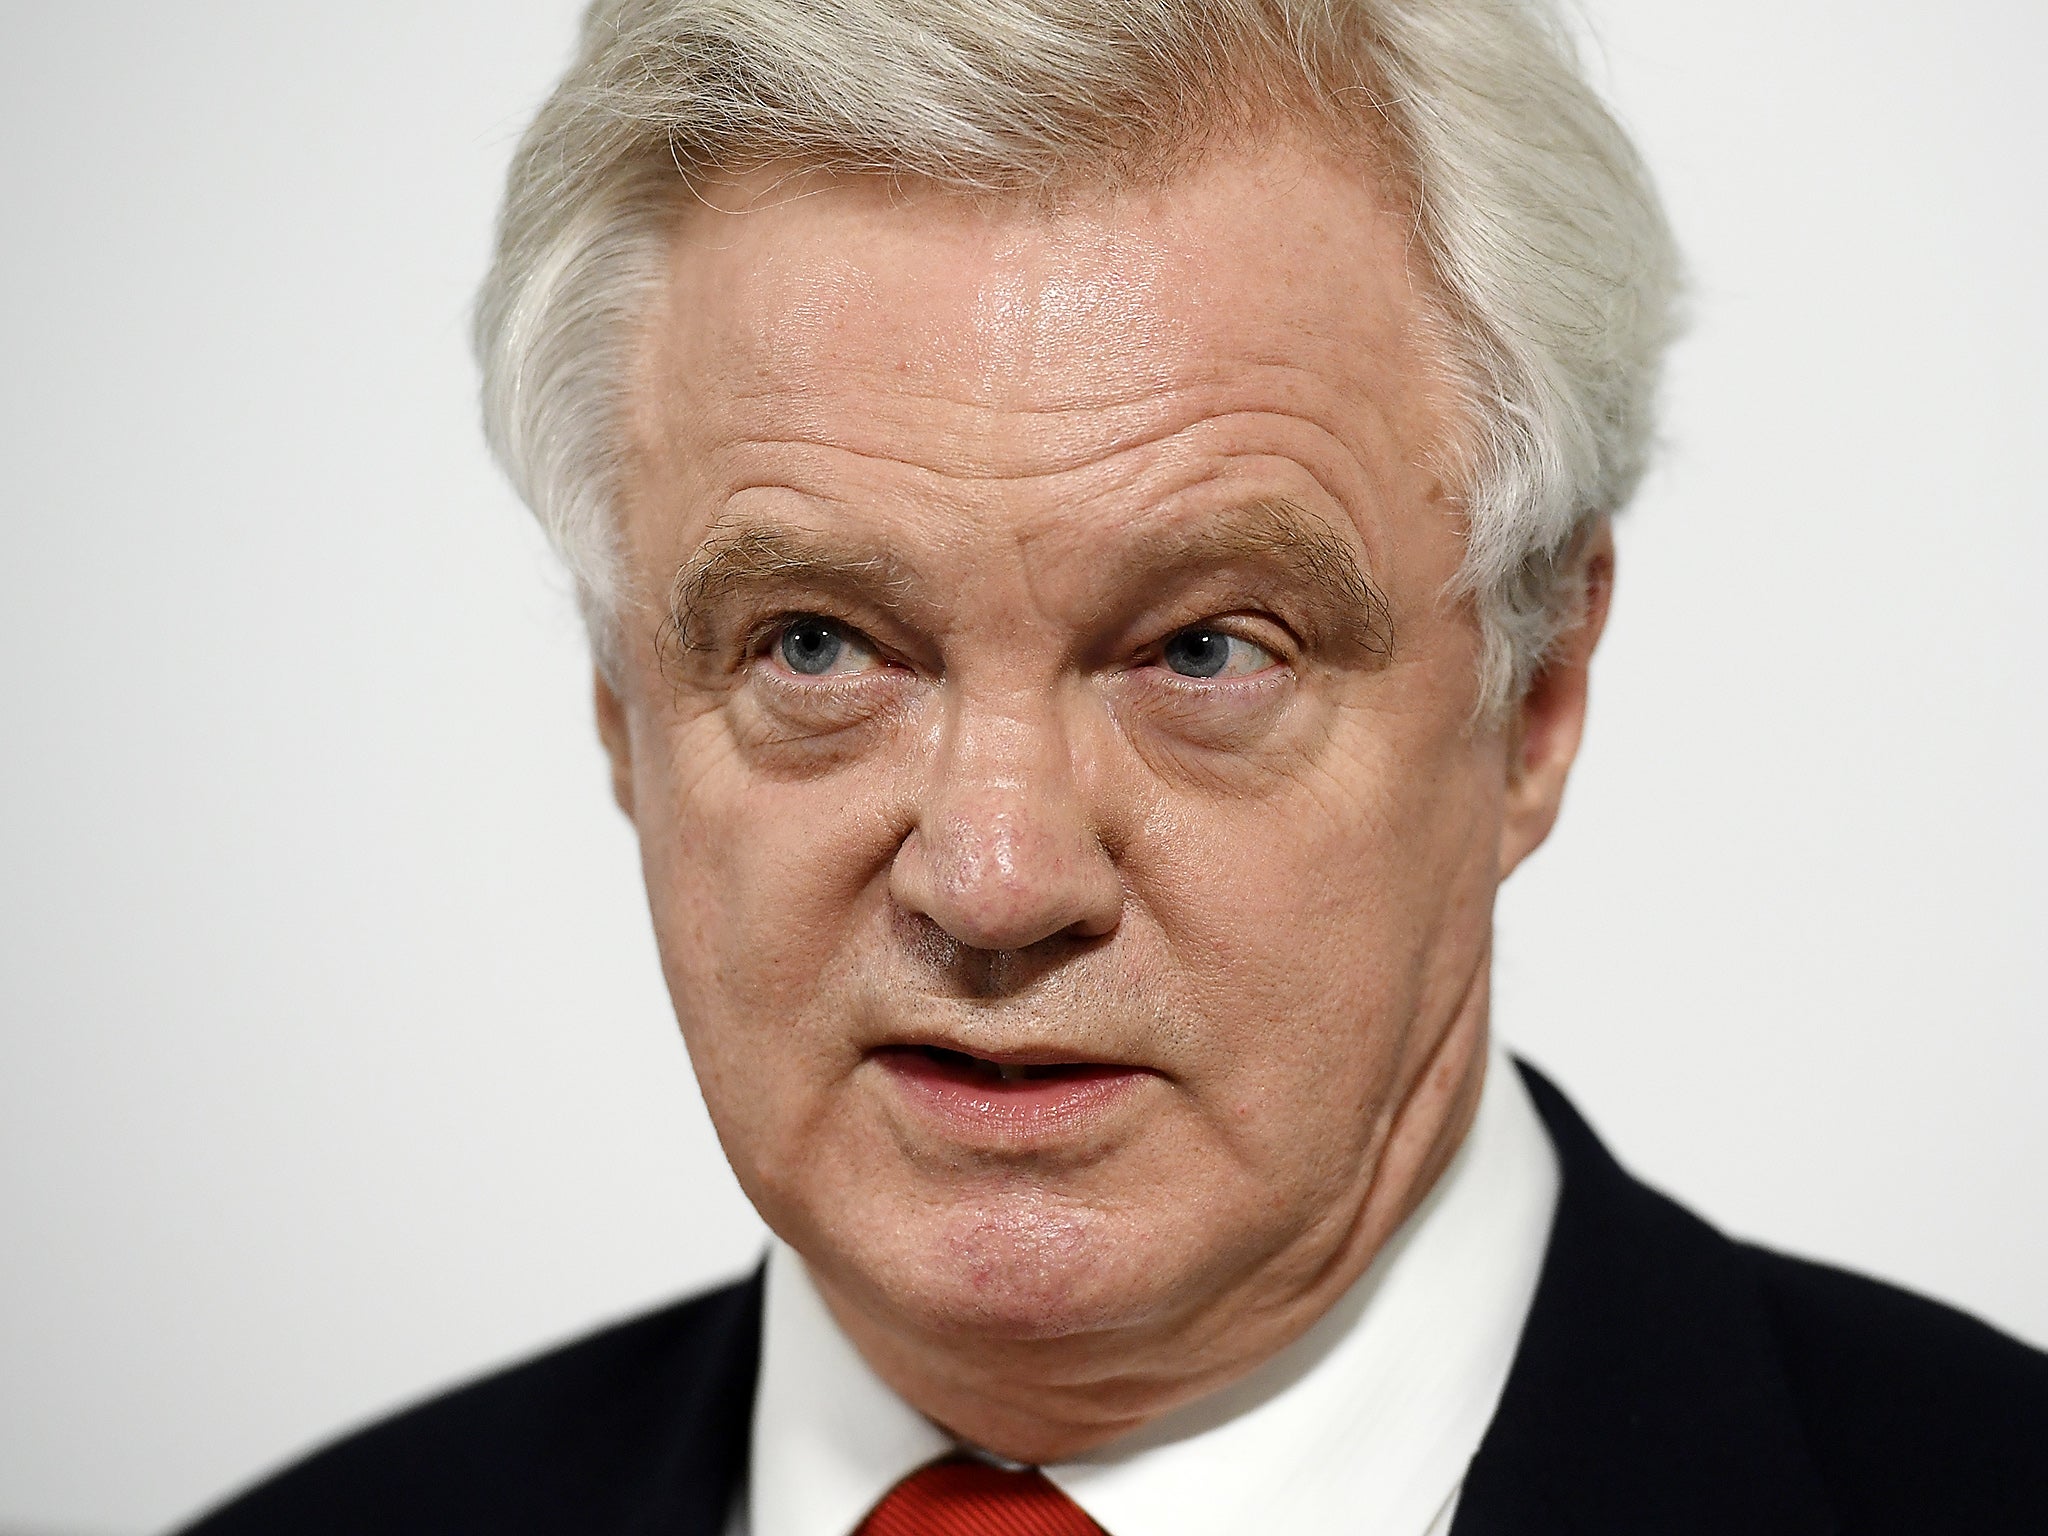 Secretary of State for Exiting the European Union, David Davis, speaks at campaign event ahead of the general election